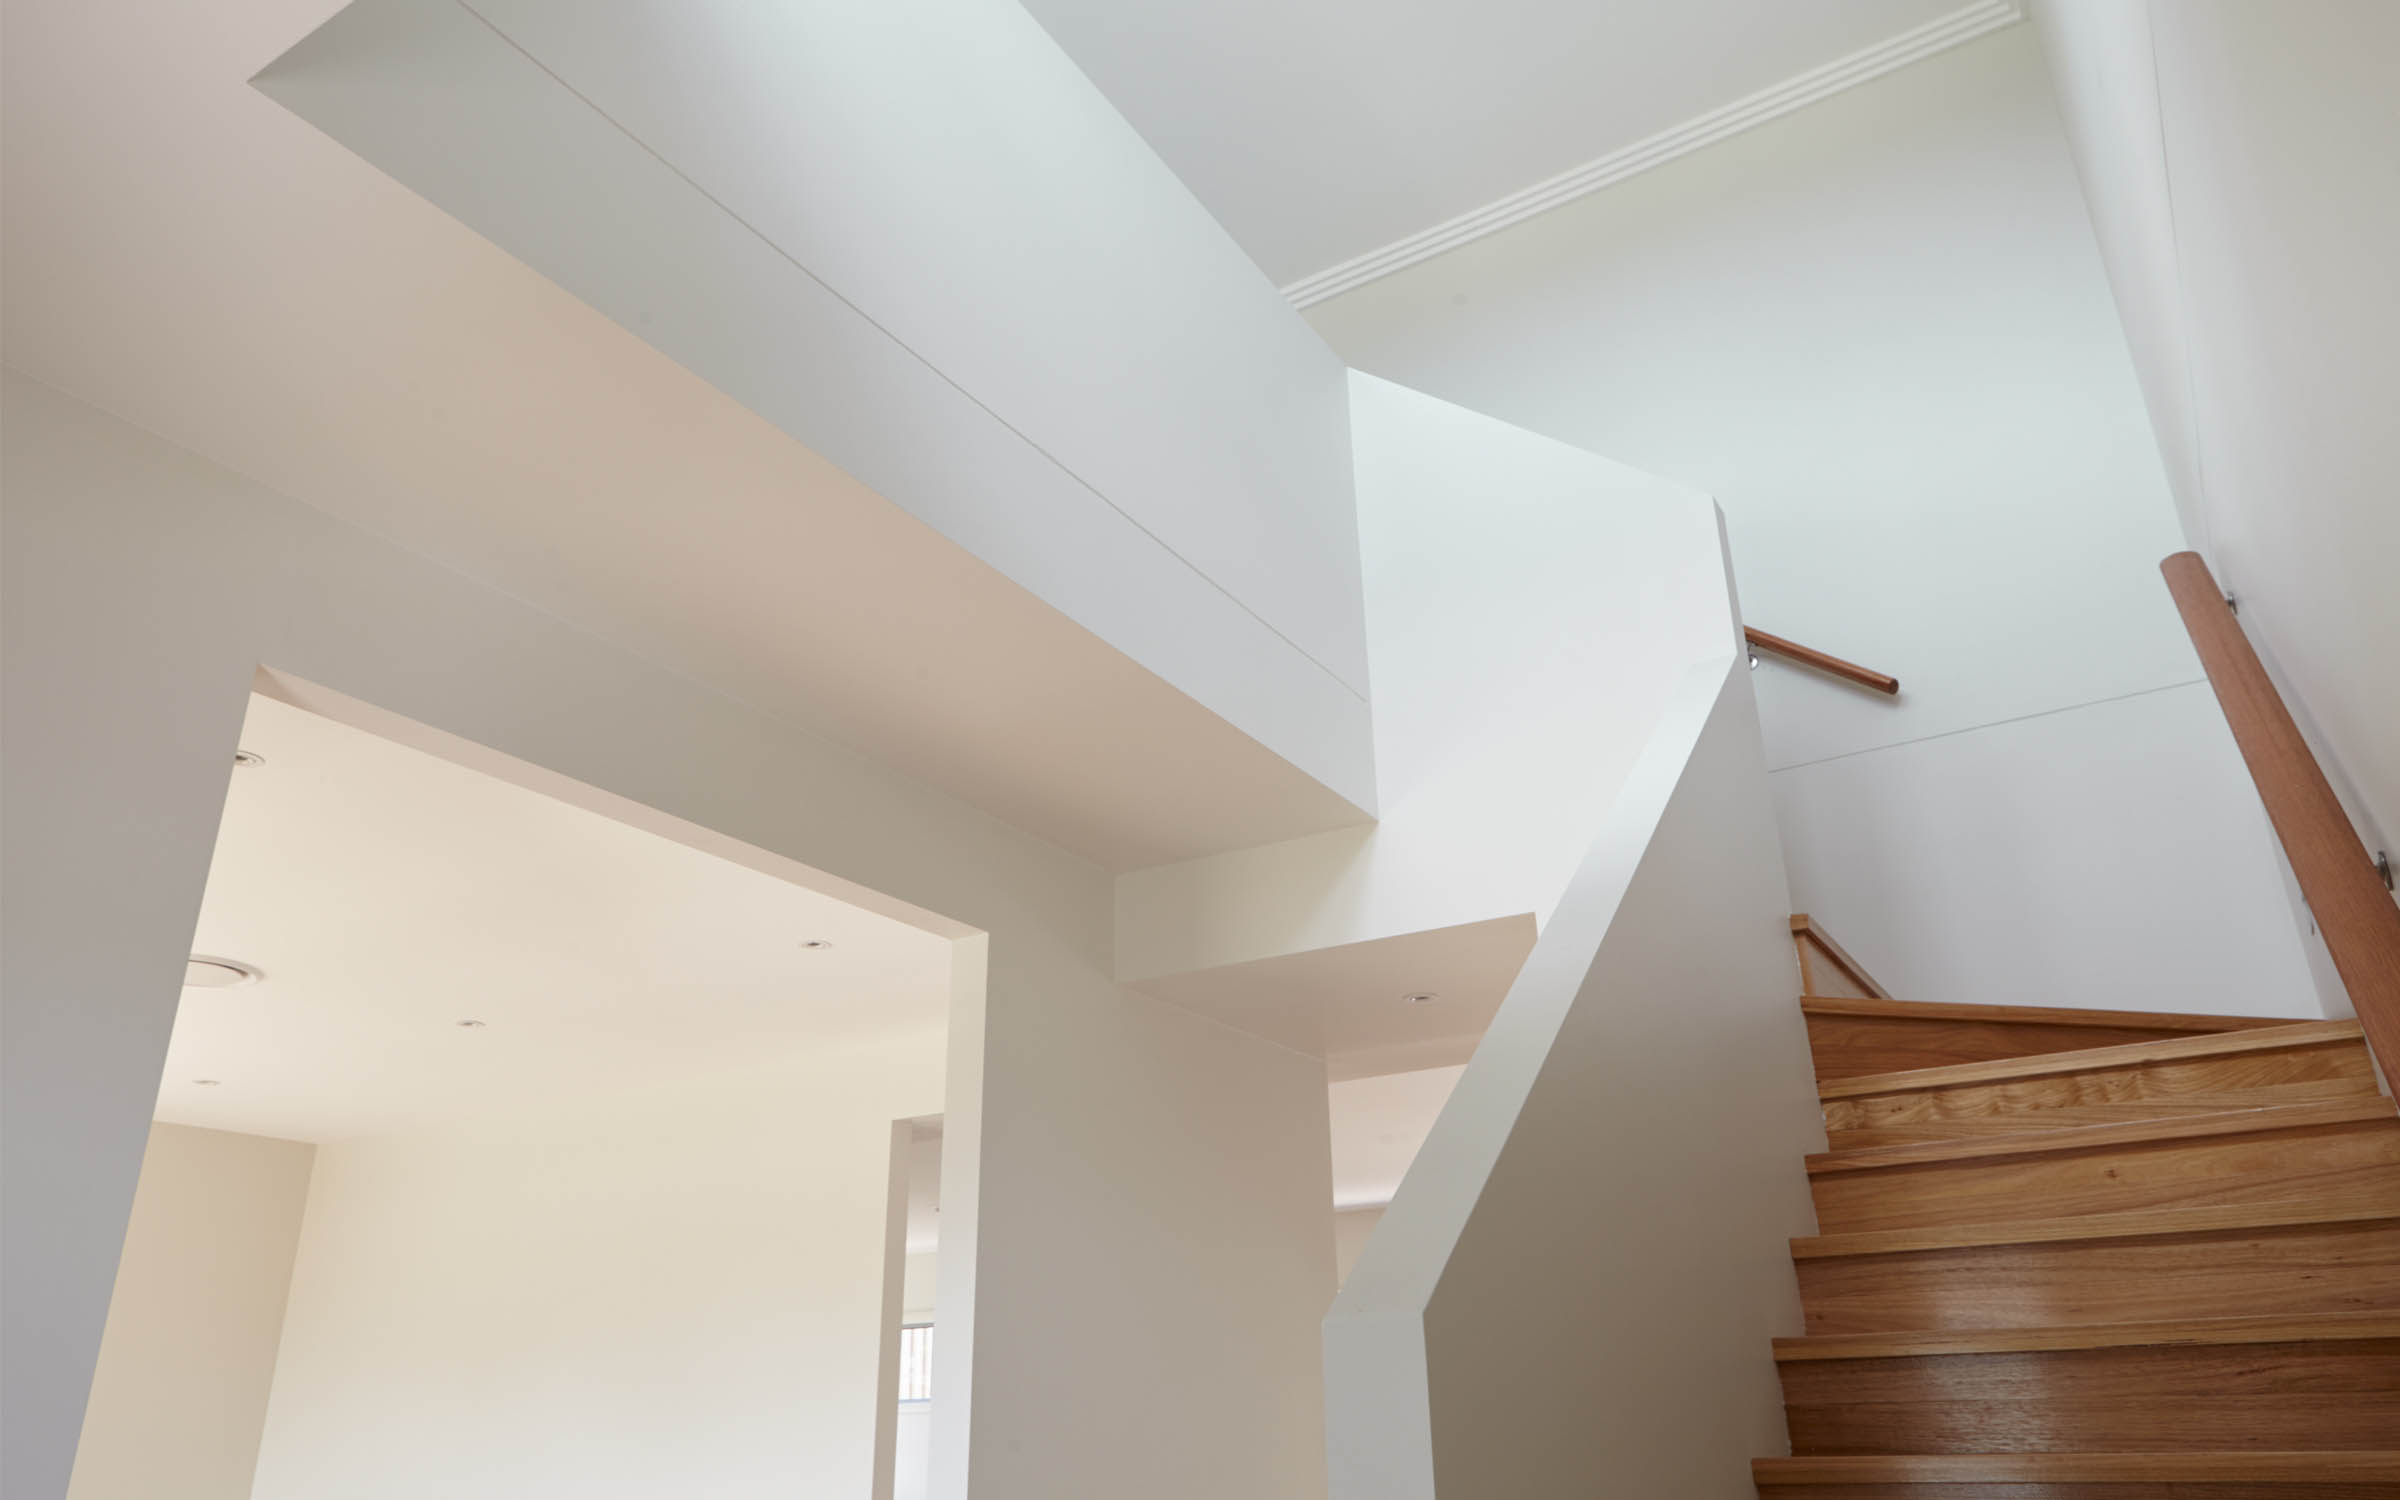 Staircase to second storey with wooden stairs and white walls.